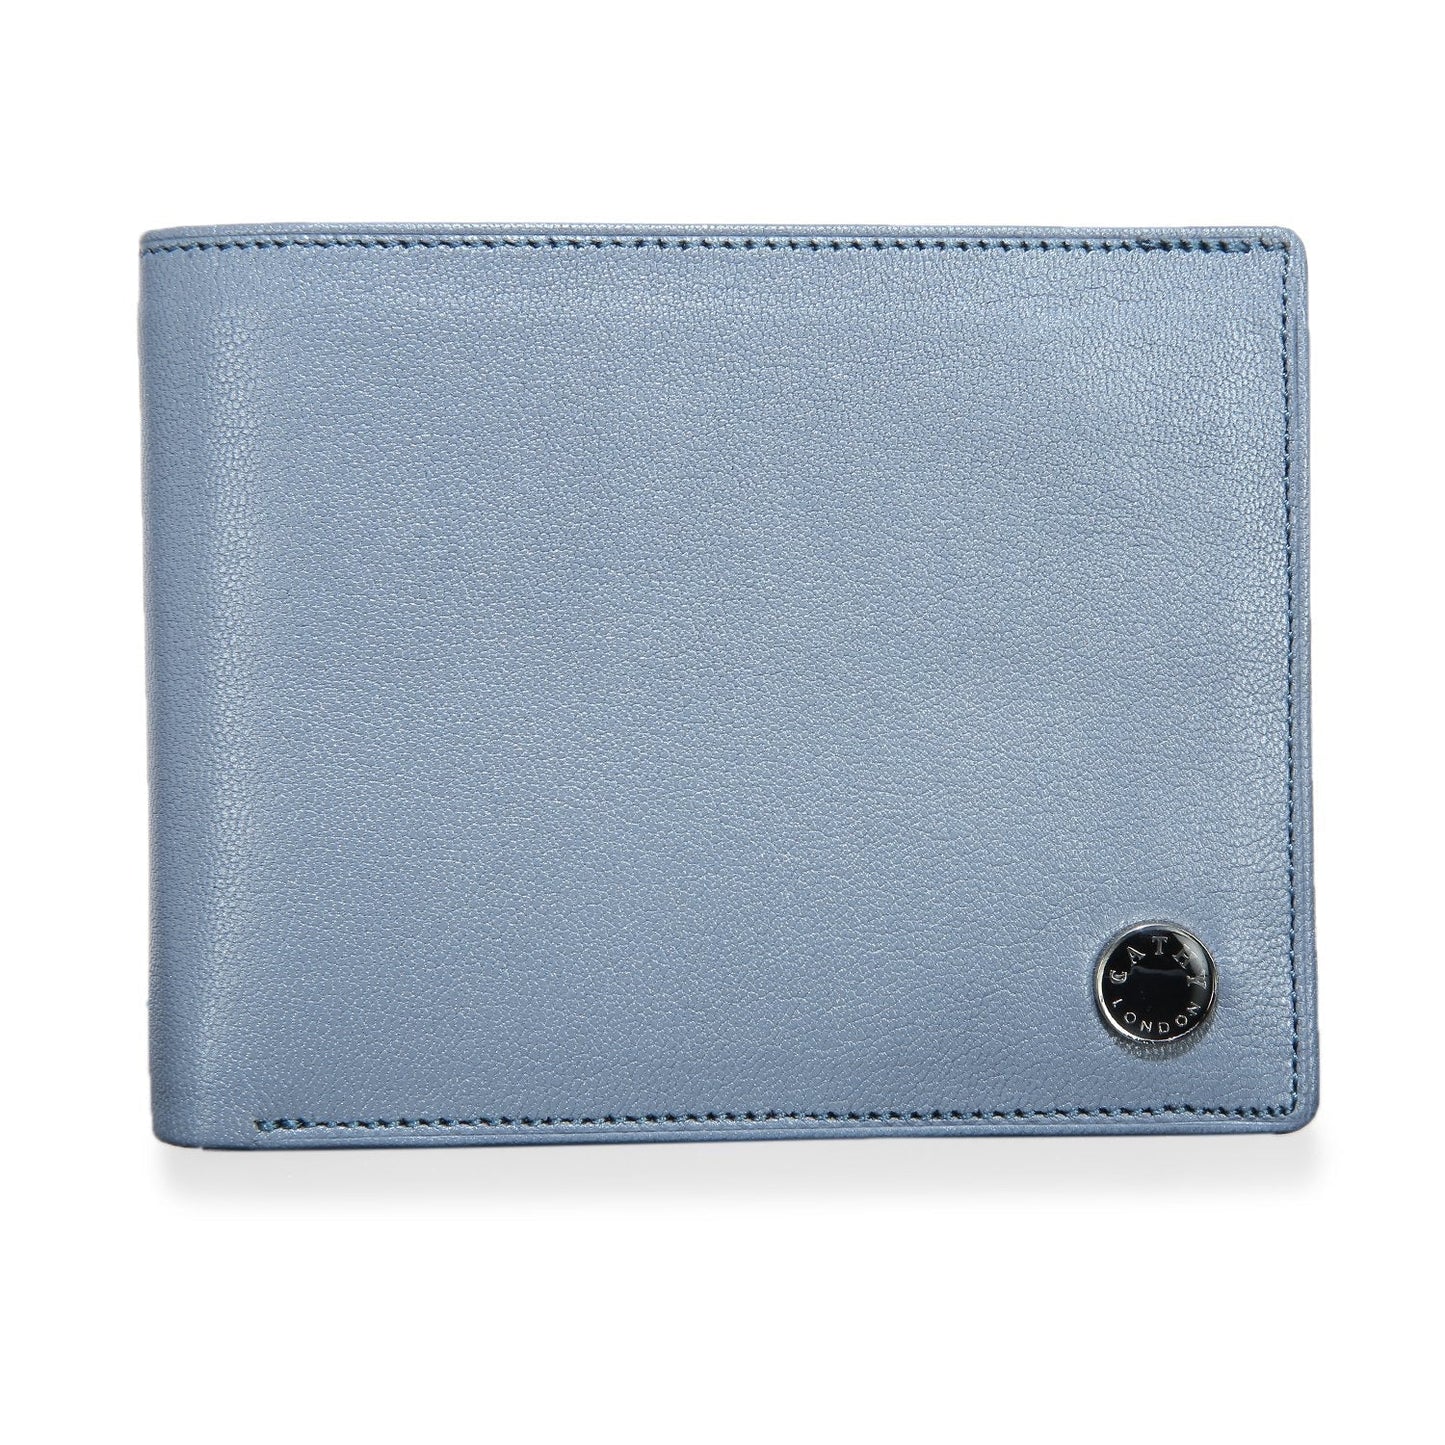 Limited Edition RFID Men's Wallet 6 cc with coin pocket